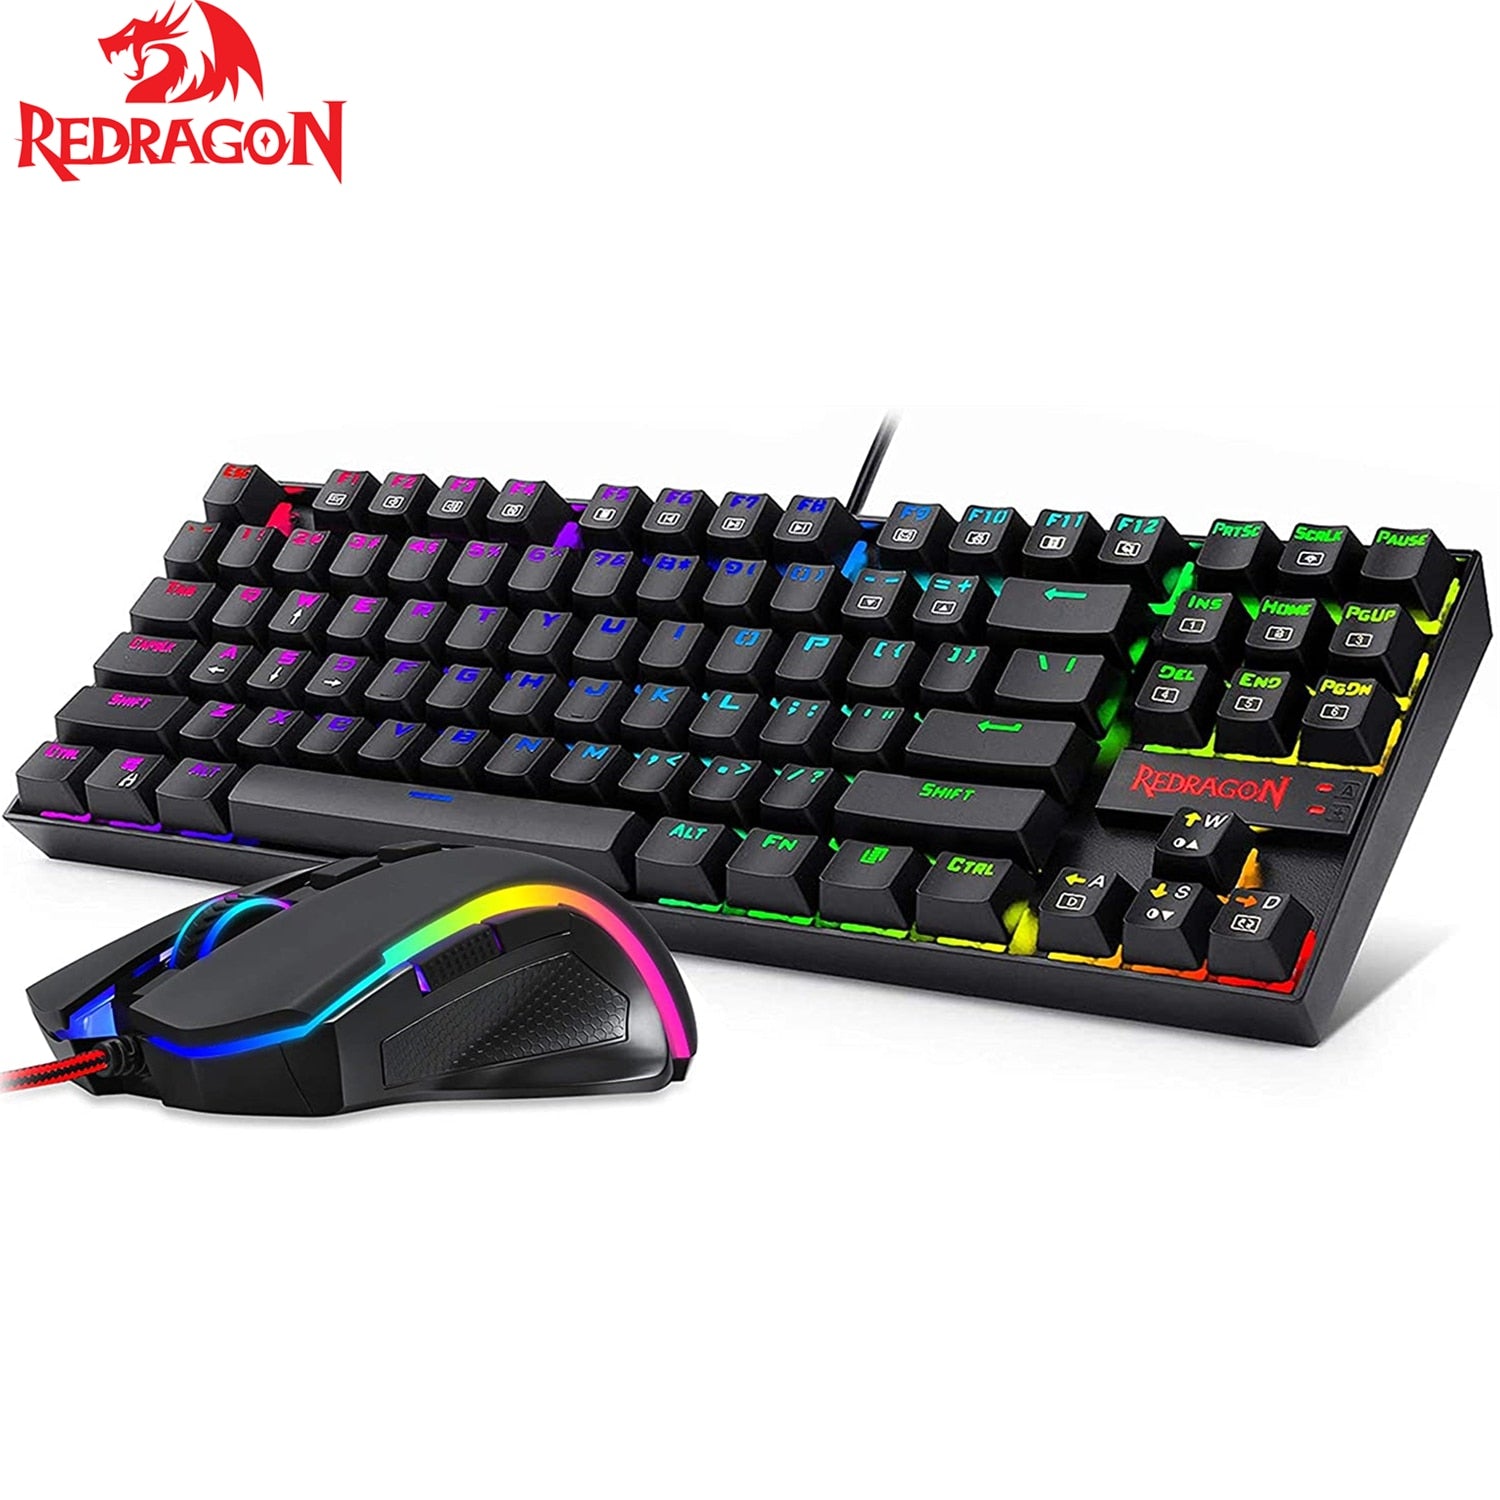 Redragon Keyboard Mouse Set K552-RGB-BA Mechanical Gaming Keyboard and Mouse Combo Wired RGB LED 60% for Windows PC Gamers